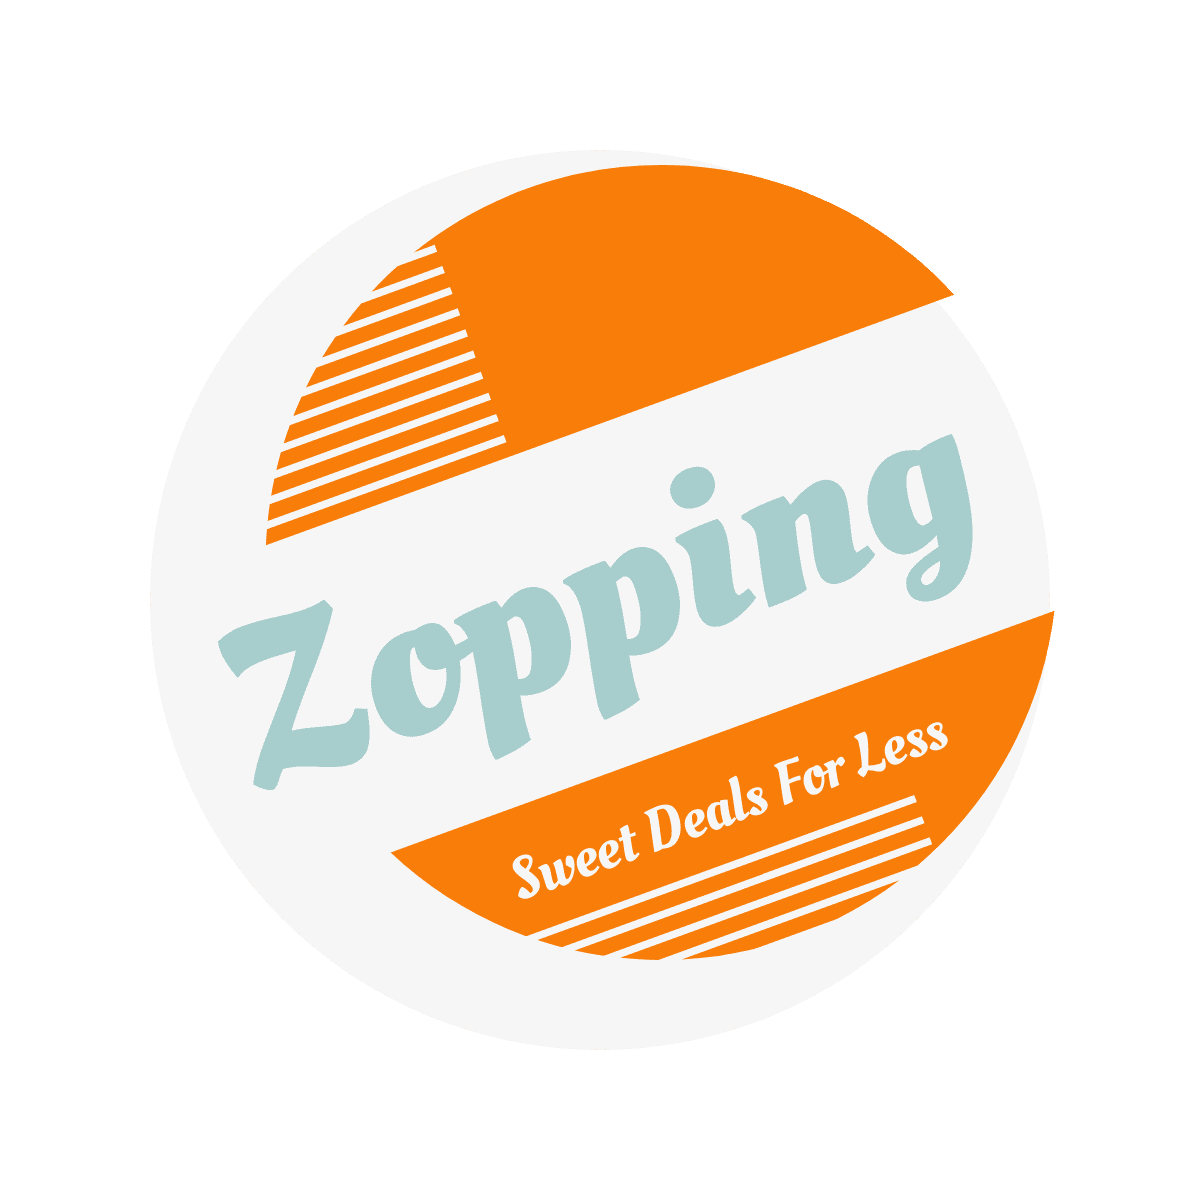 Zopping